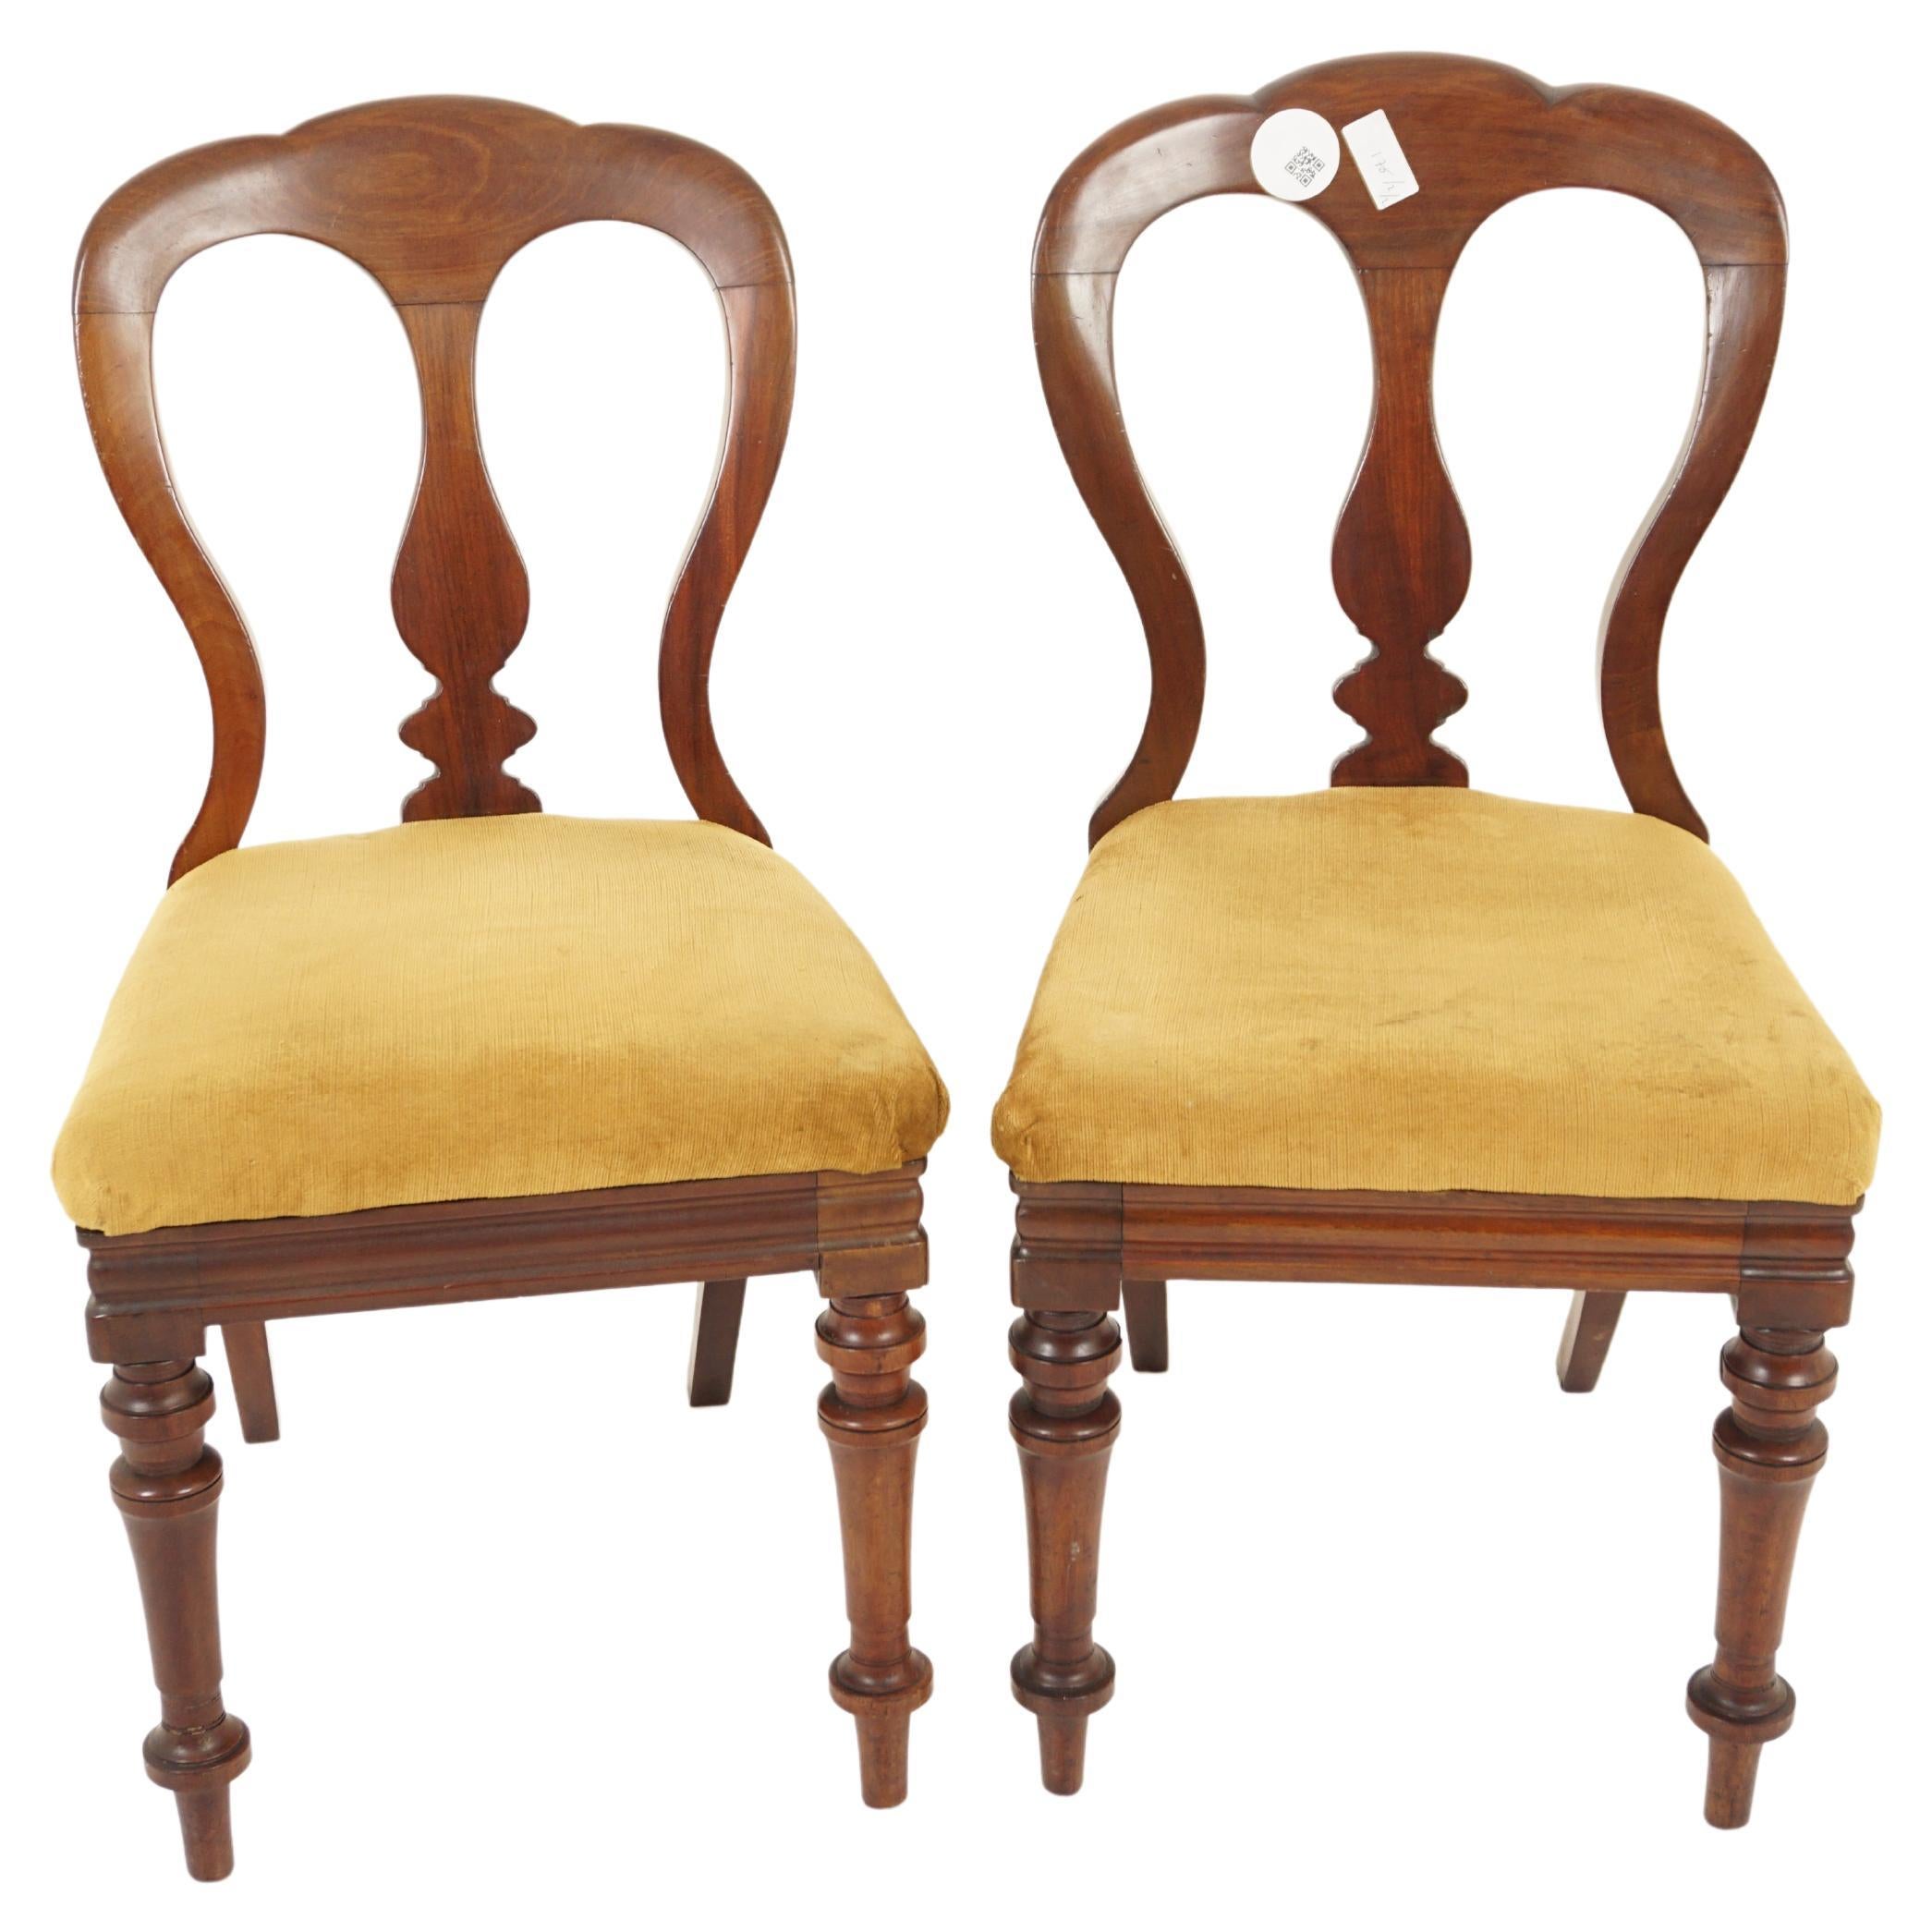 Antique Walnut Chairs, Pair of Balloon Back Dining Chairs, Scotland 1880, H1133 For Sale